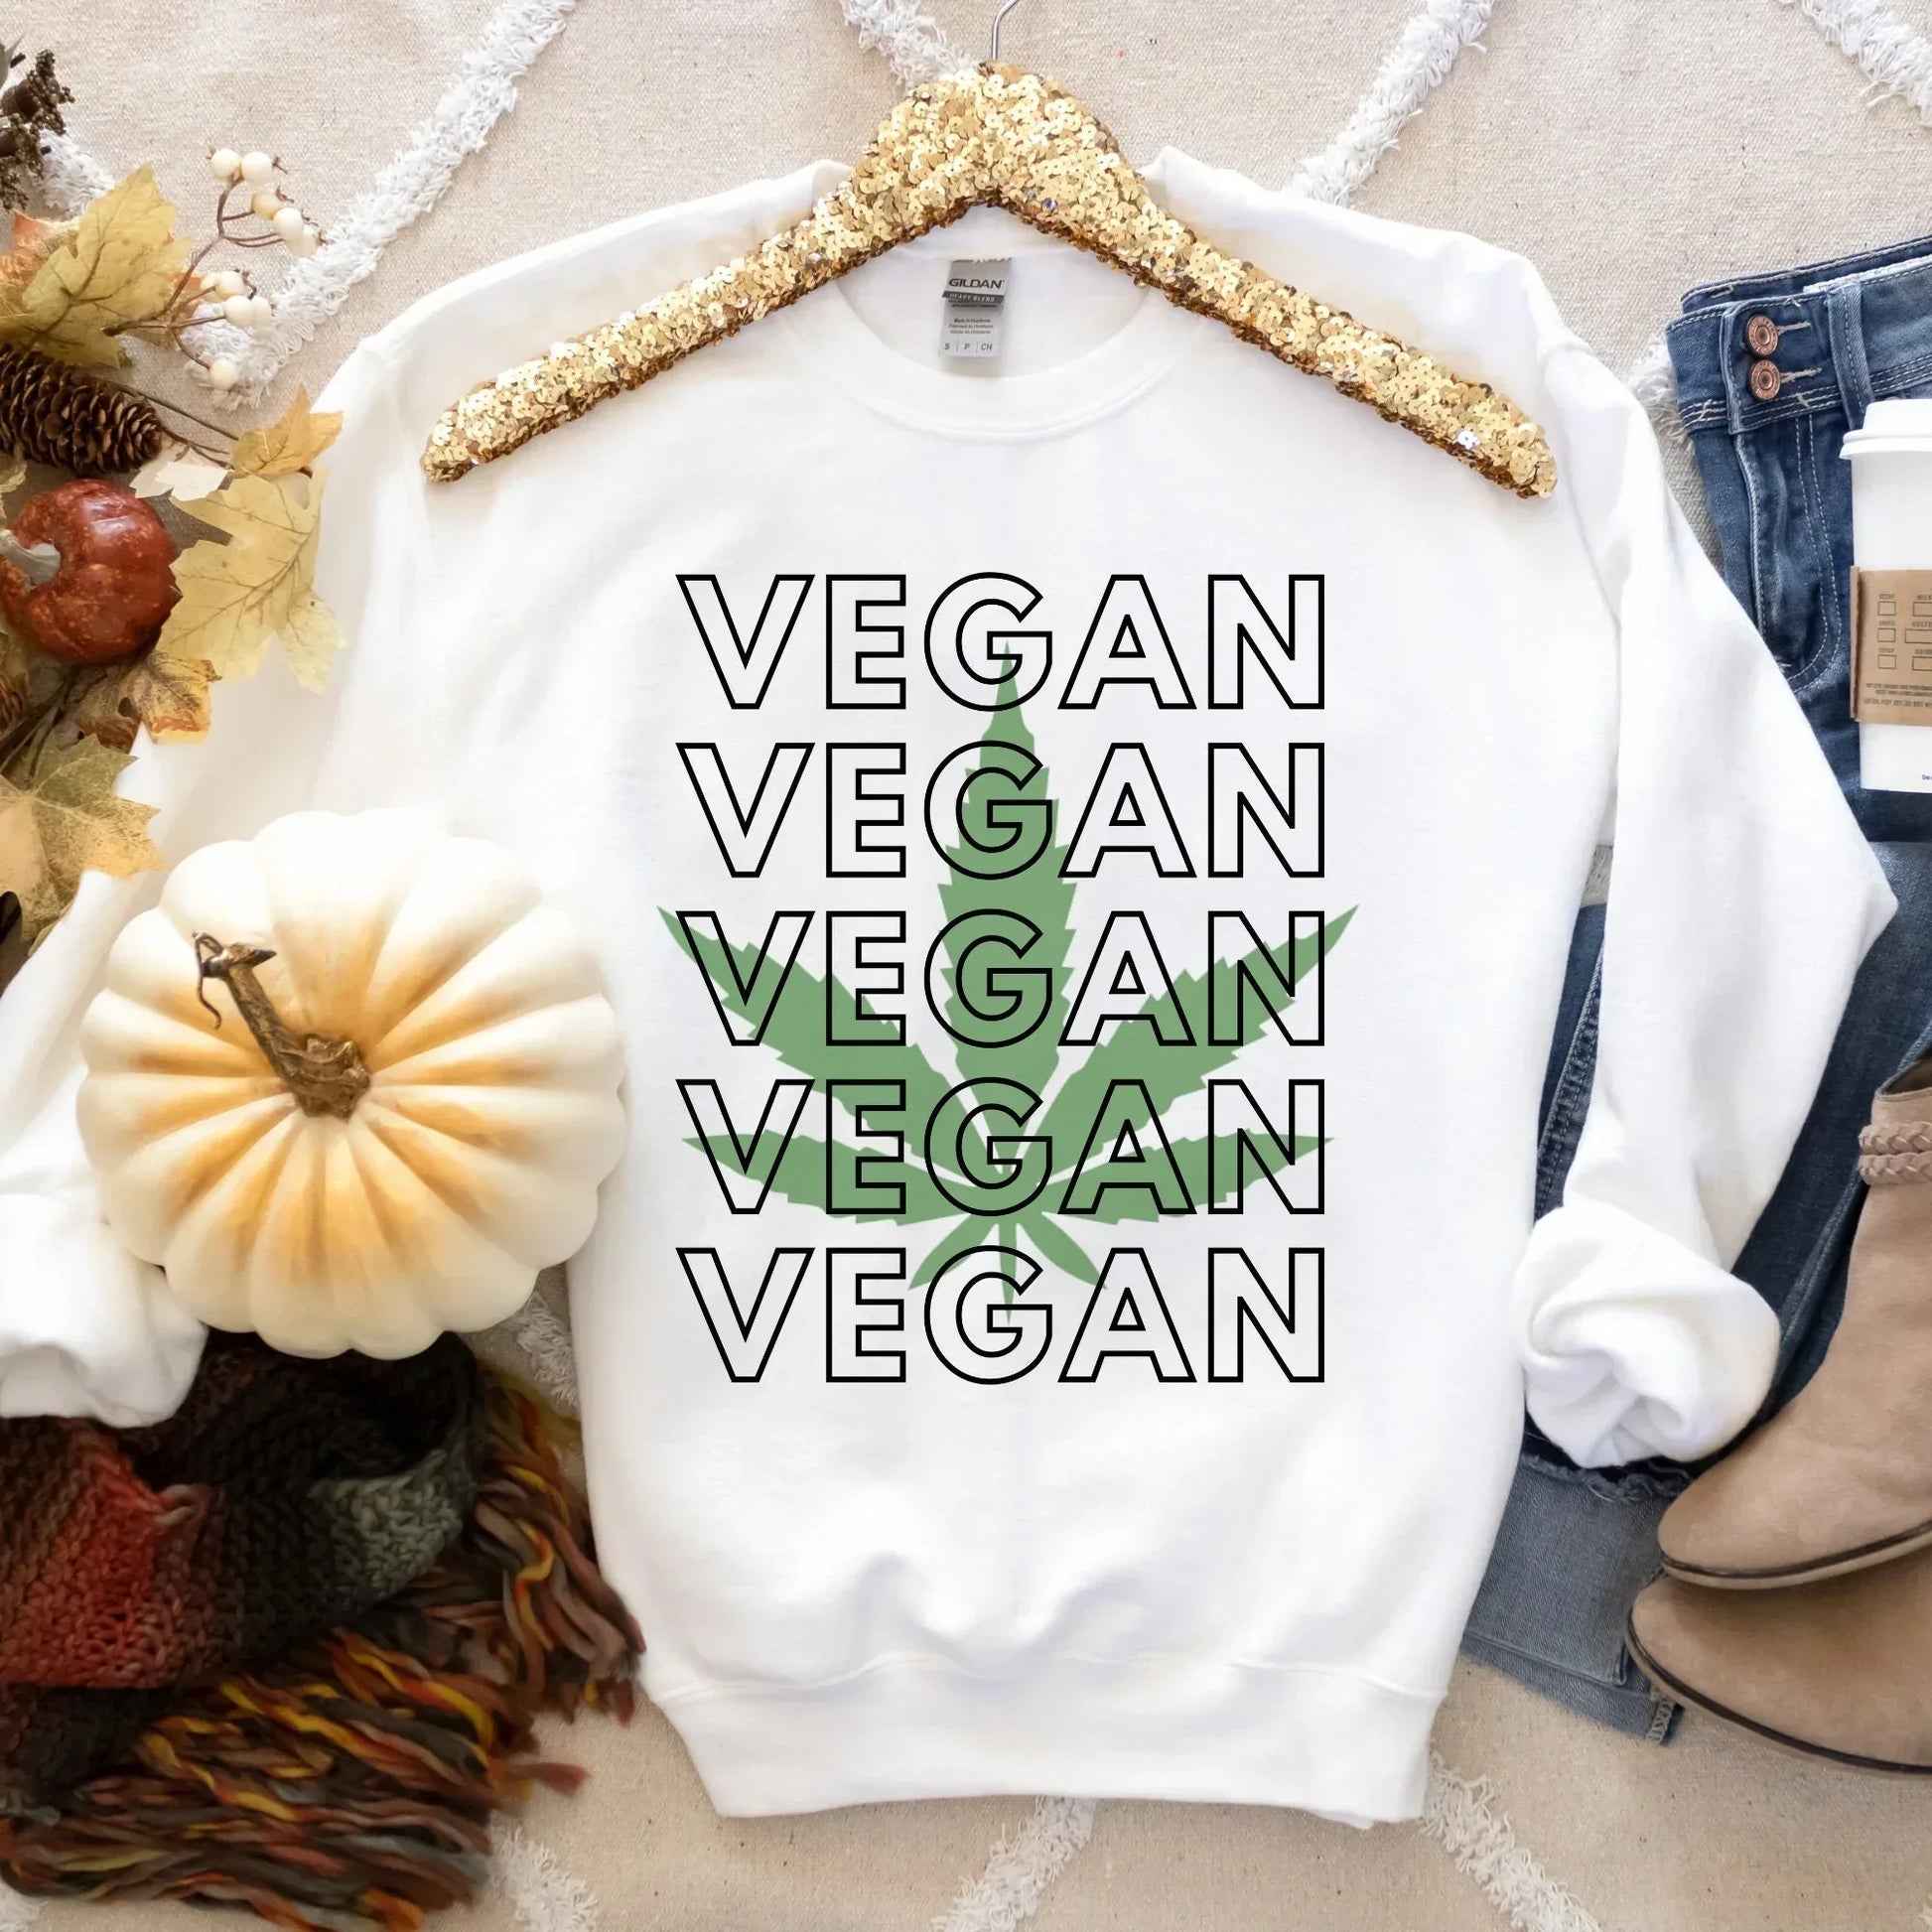 Vegan Shirt, Hippie Clothes, Stoner Gifts, Weed Gifts, Weed Shirt, Stoner Girl, Stoner Gift for Him, Stoner Gift for Her, Marijuana T shirts